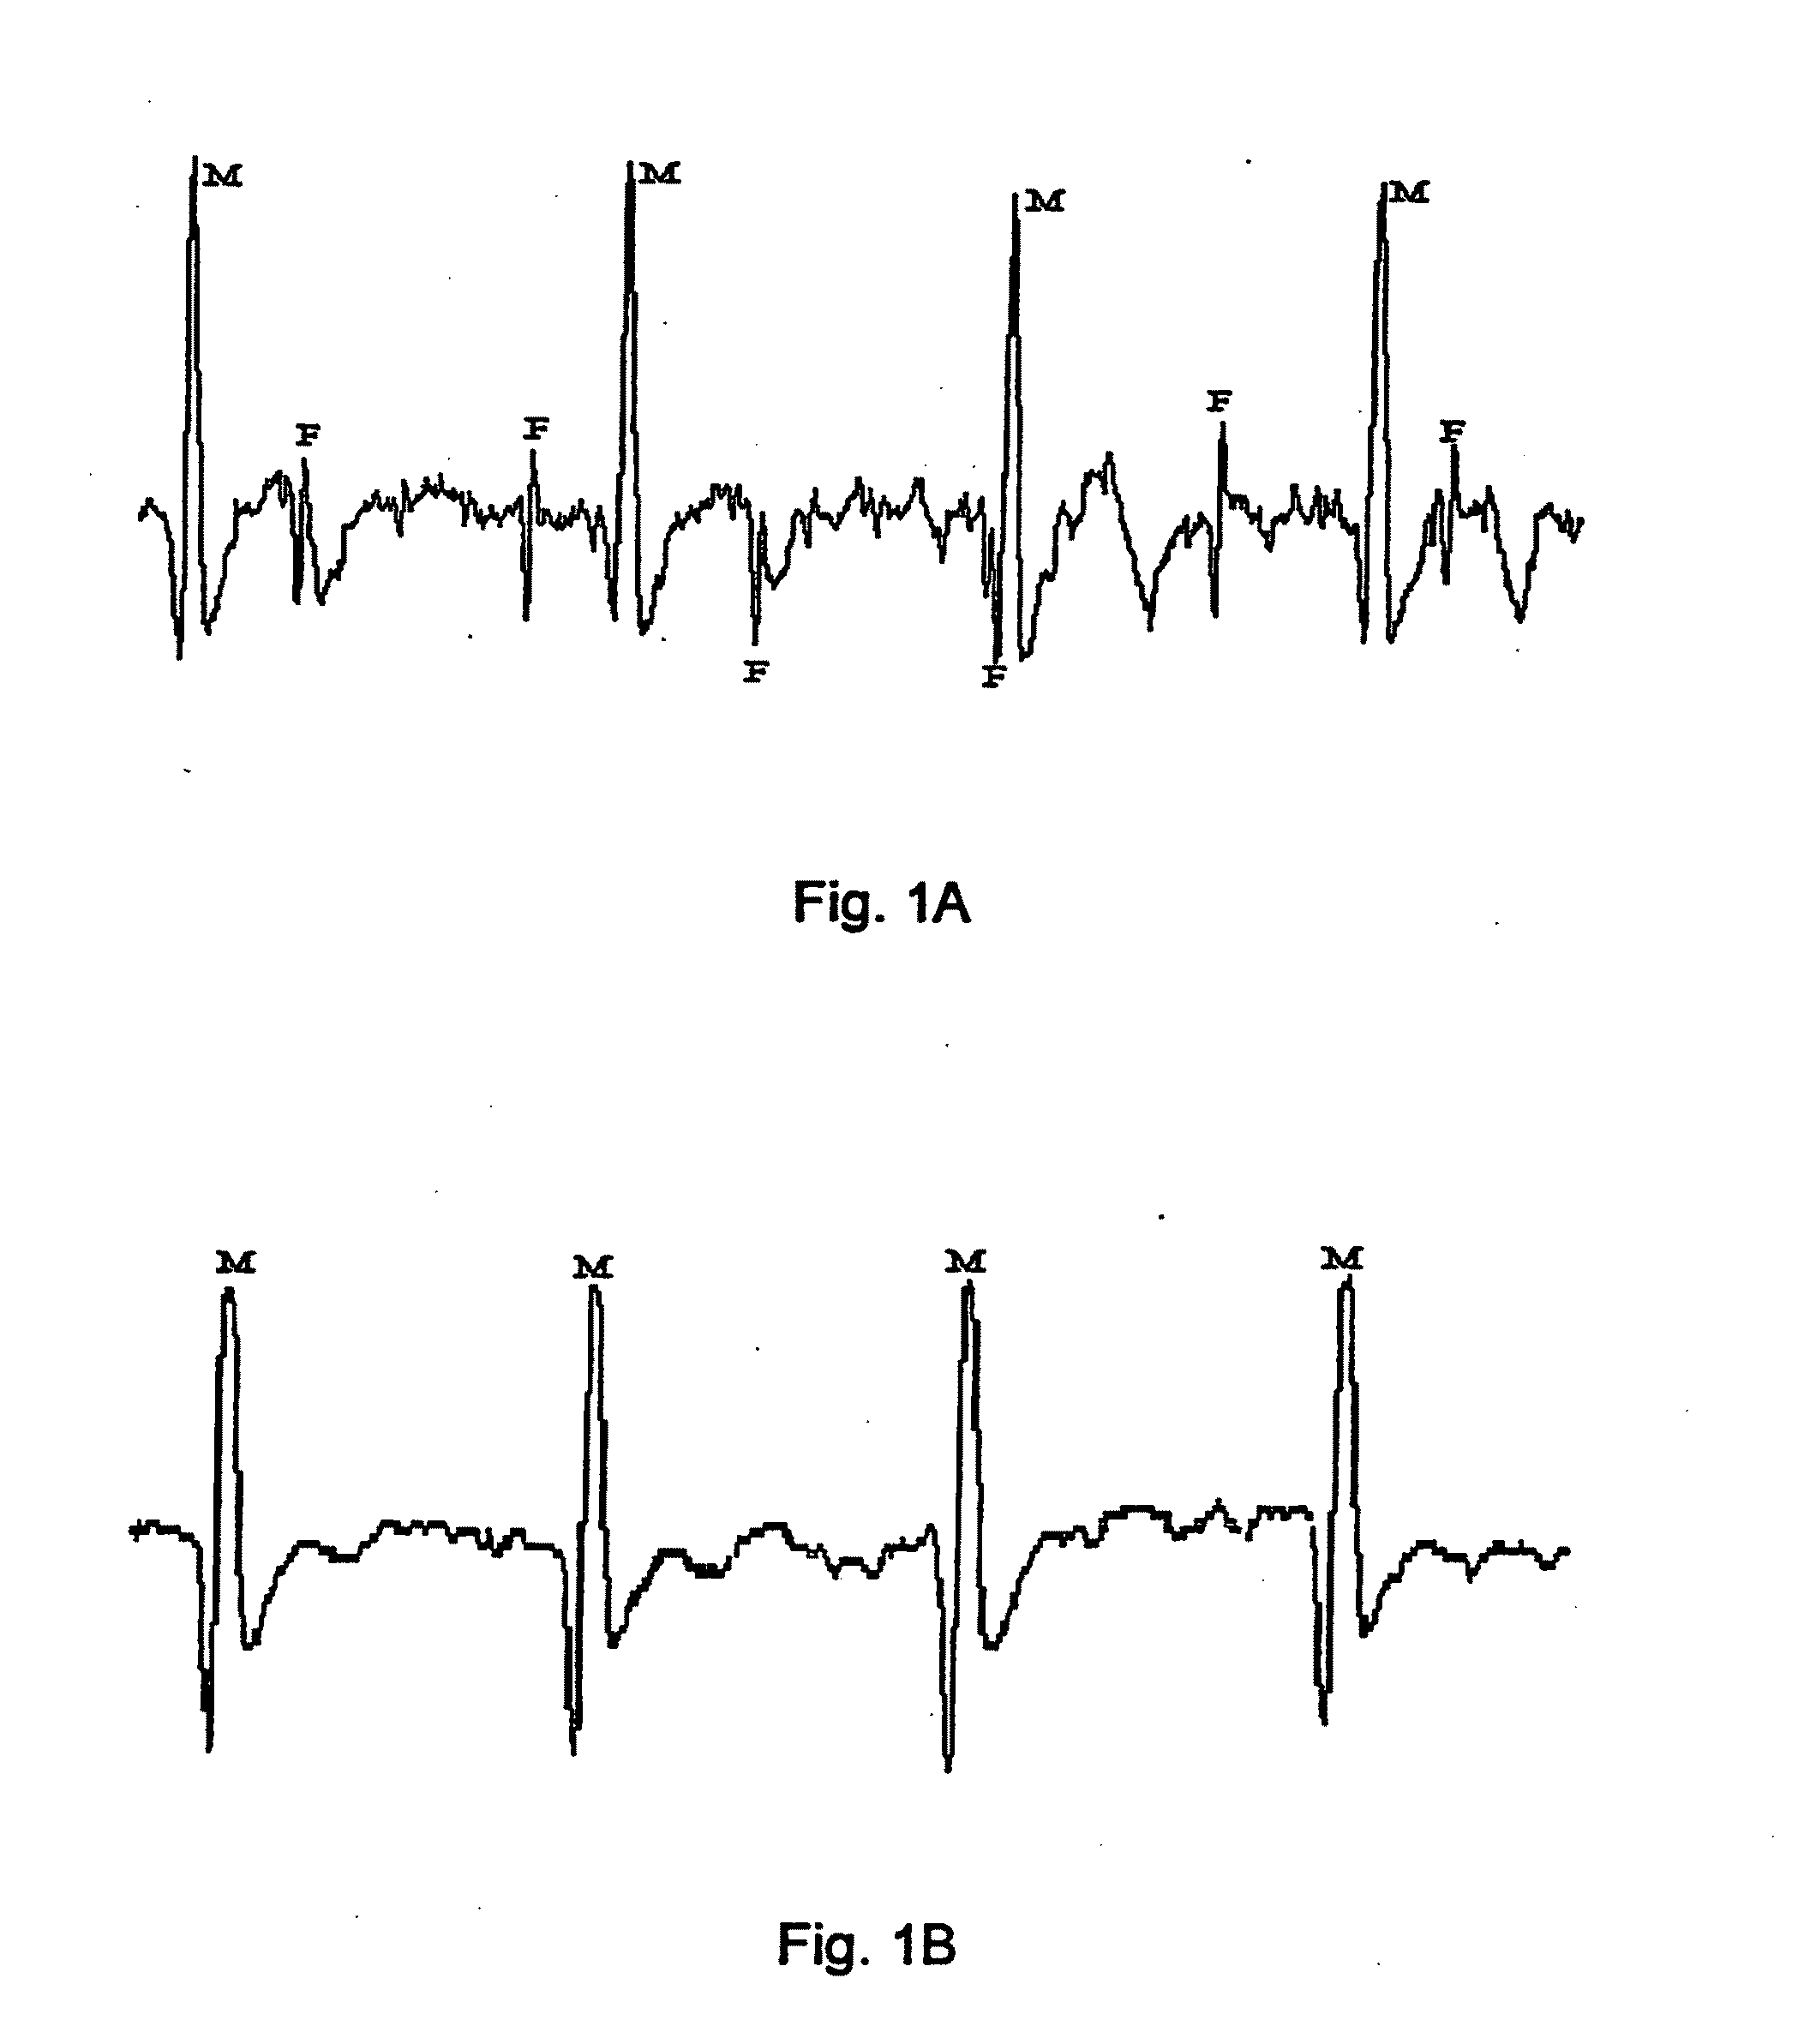 Apparatus and method for detecting a fetal heart rate